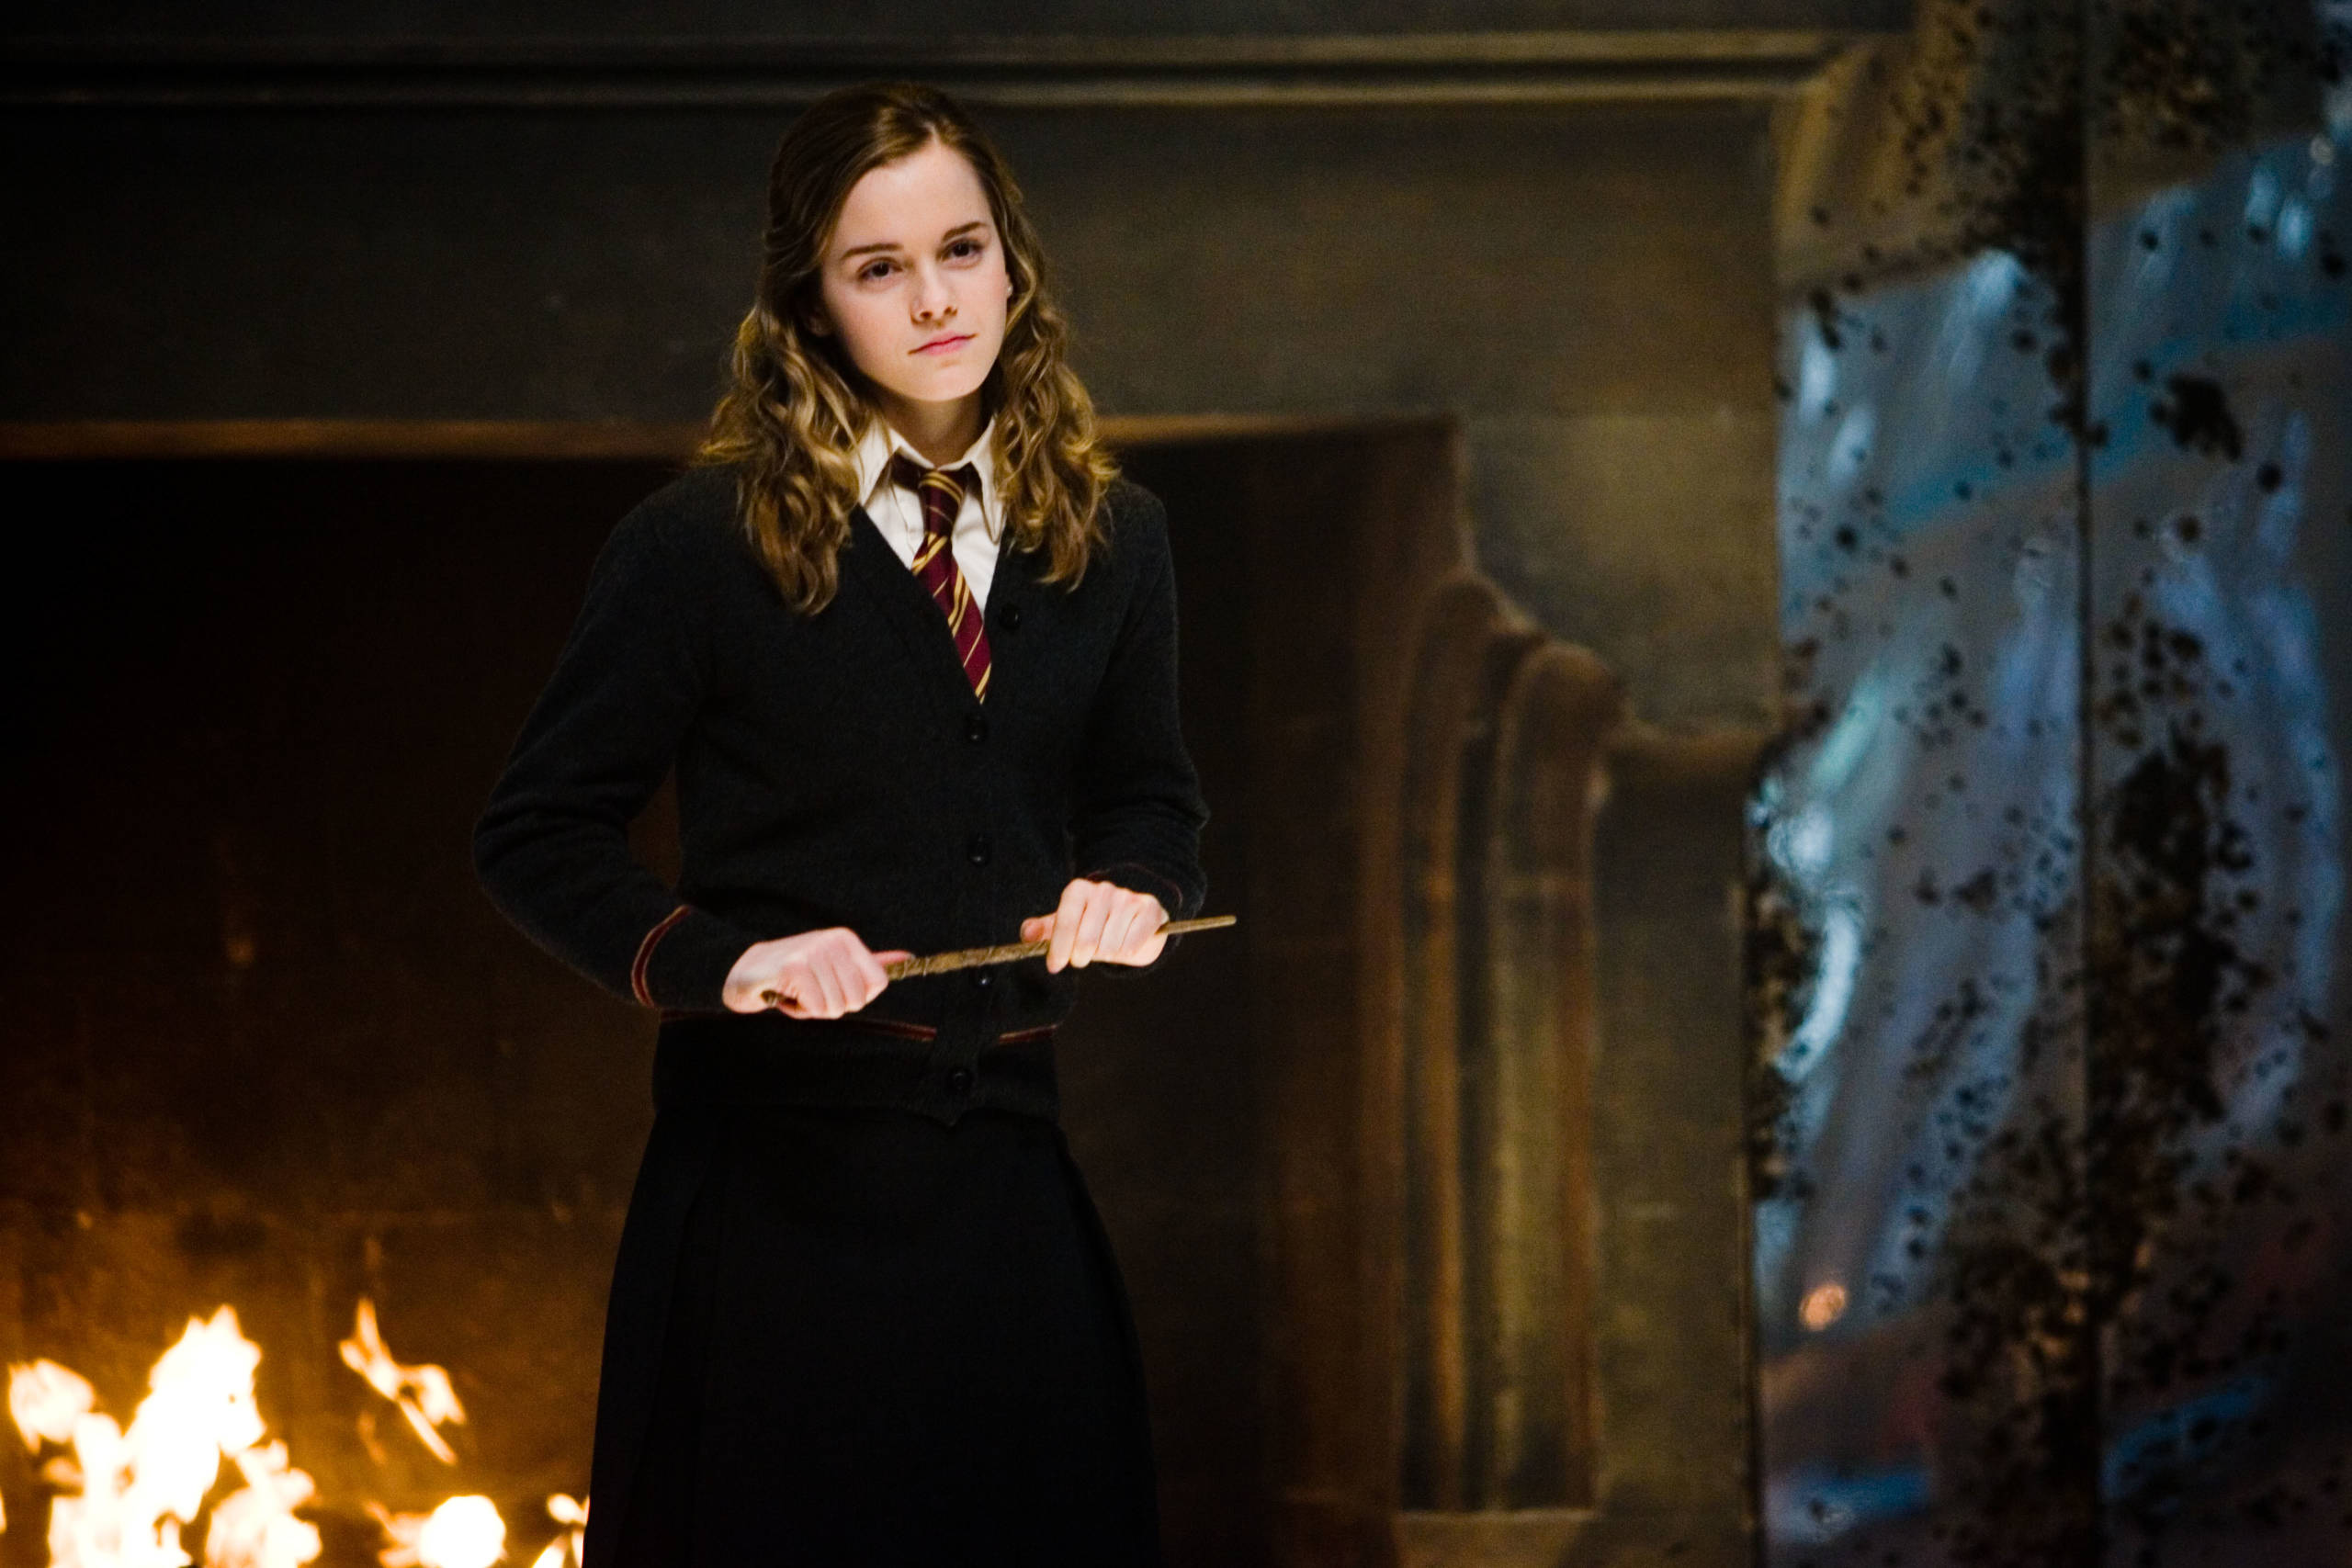 From Hermione to Bellatrix: Girl Name Ideas for Potterheads